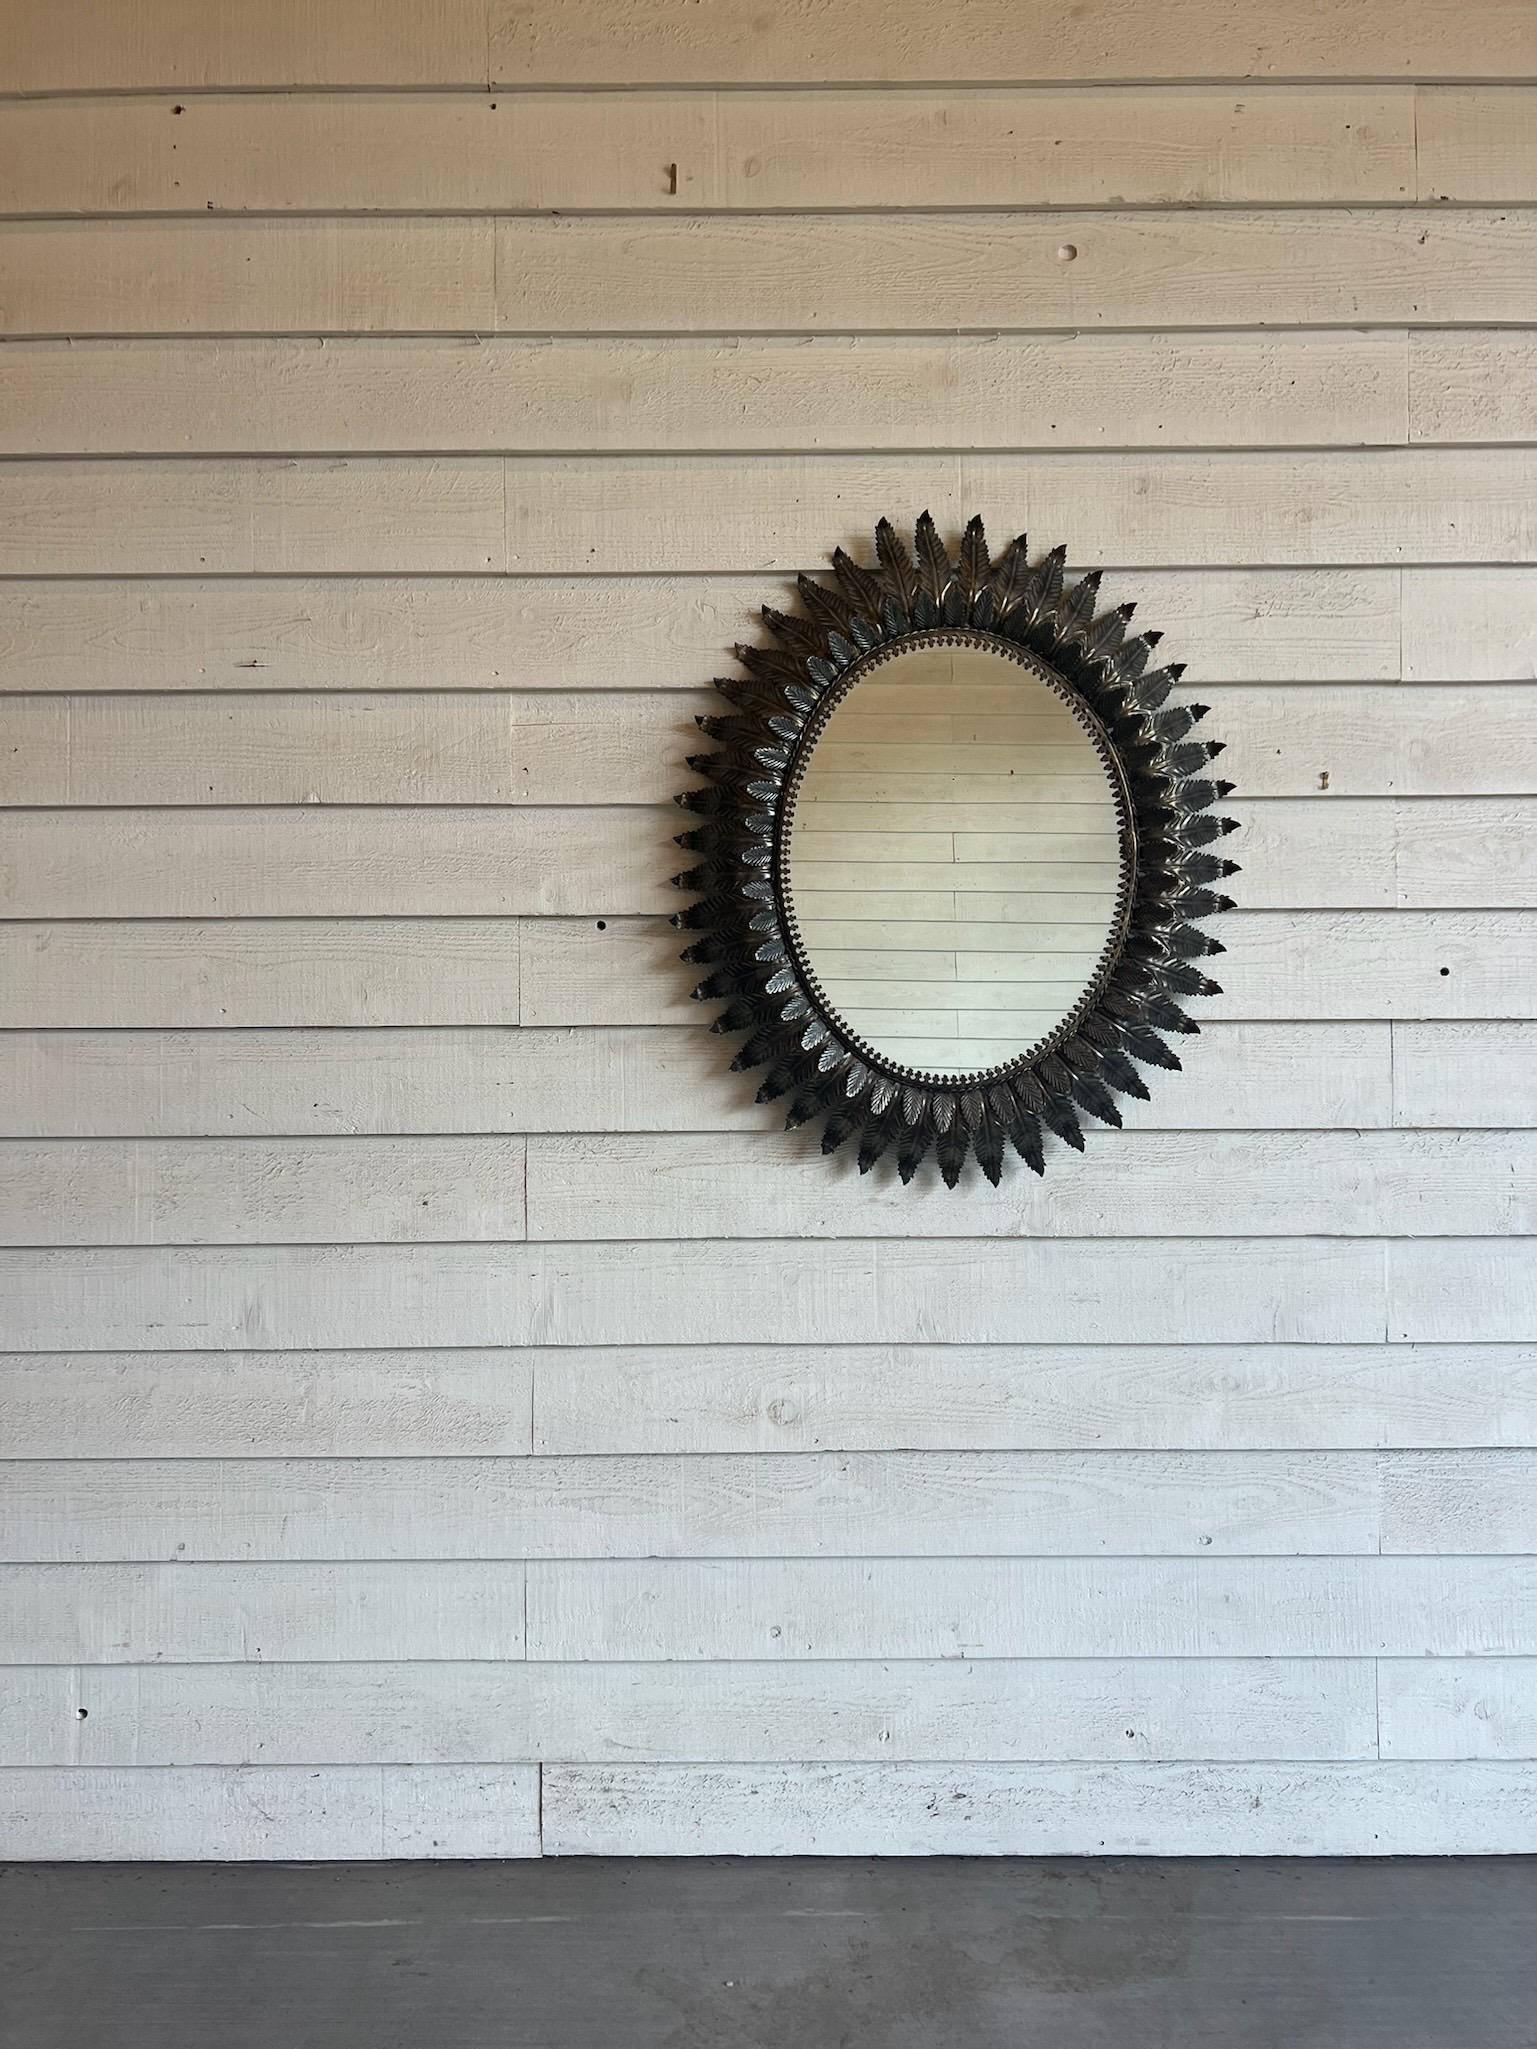 Handcrafted with exquisite detail, this oval Spanish mirror includes hand cut metal leaf detail which surrounds the mirror itself in three rows, each with the leaf in varying size. Discovered in Northern Spain near Barcelona, this mirror measures